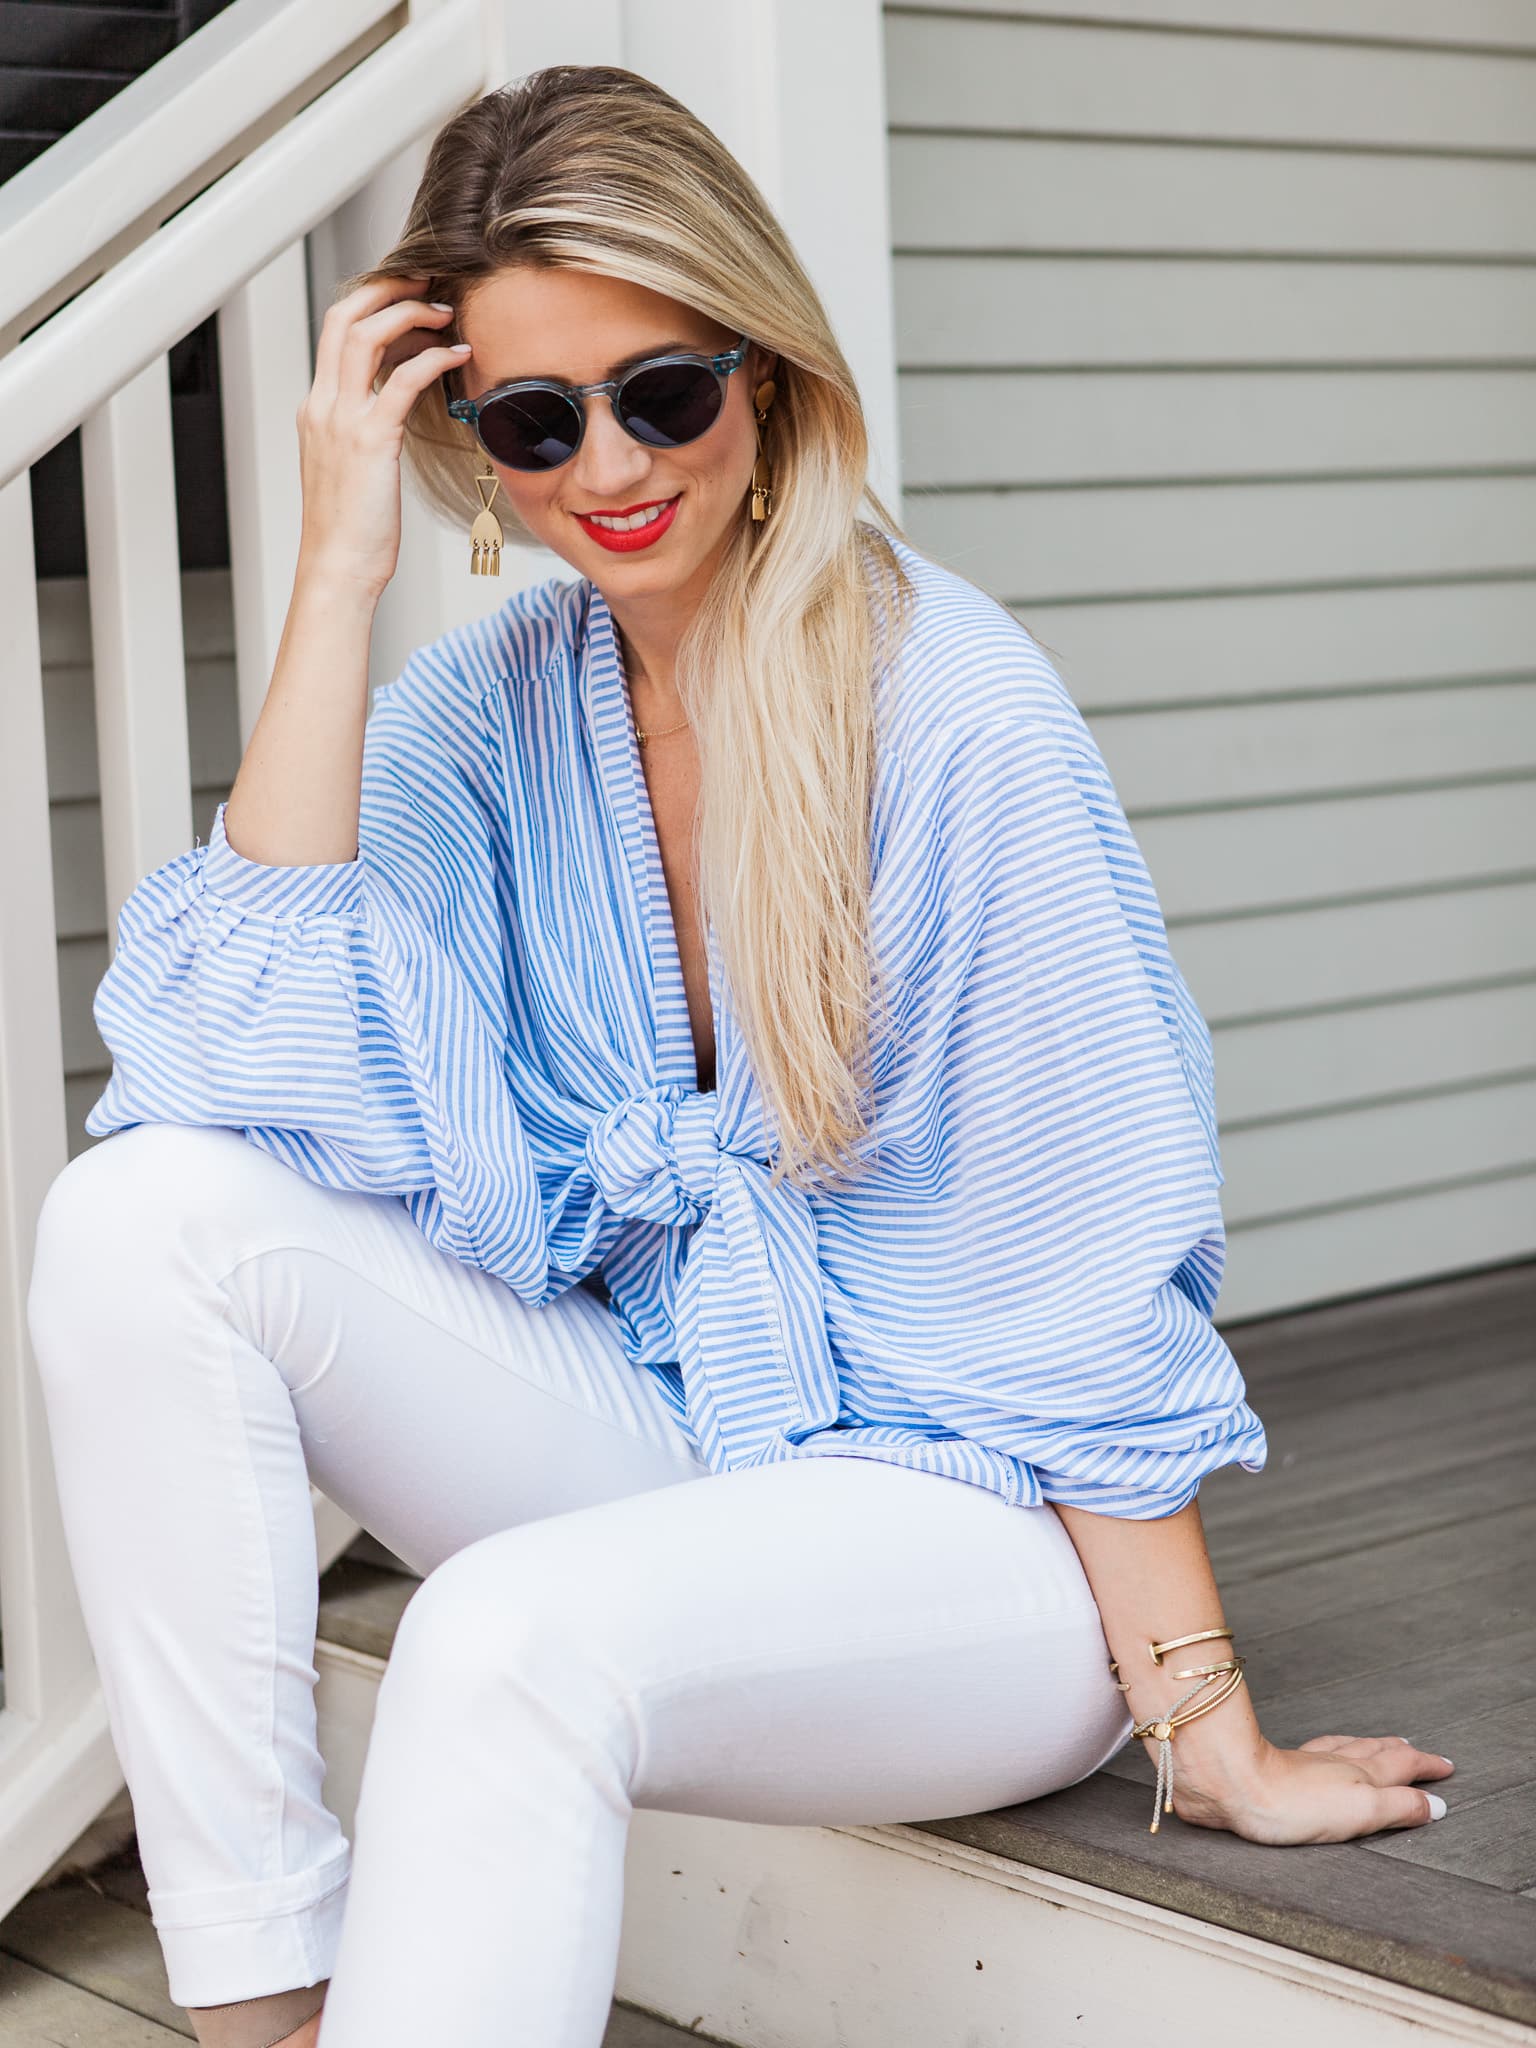 Summer Style Files: Nautical Nantucket - The Road Les Traveled